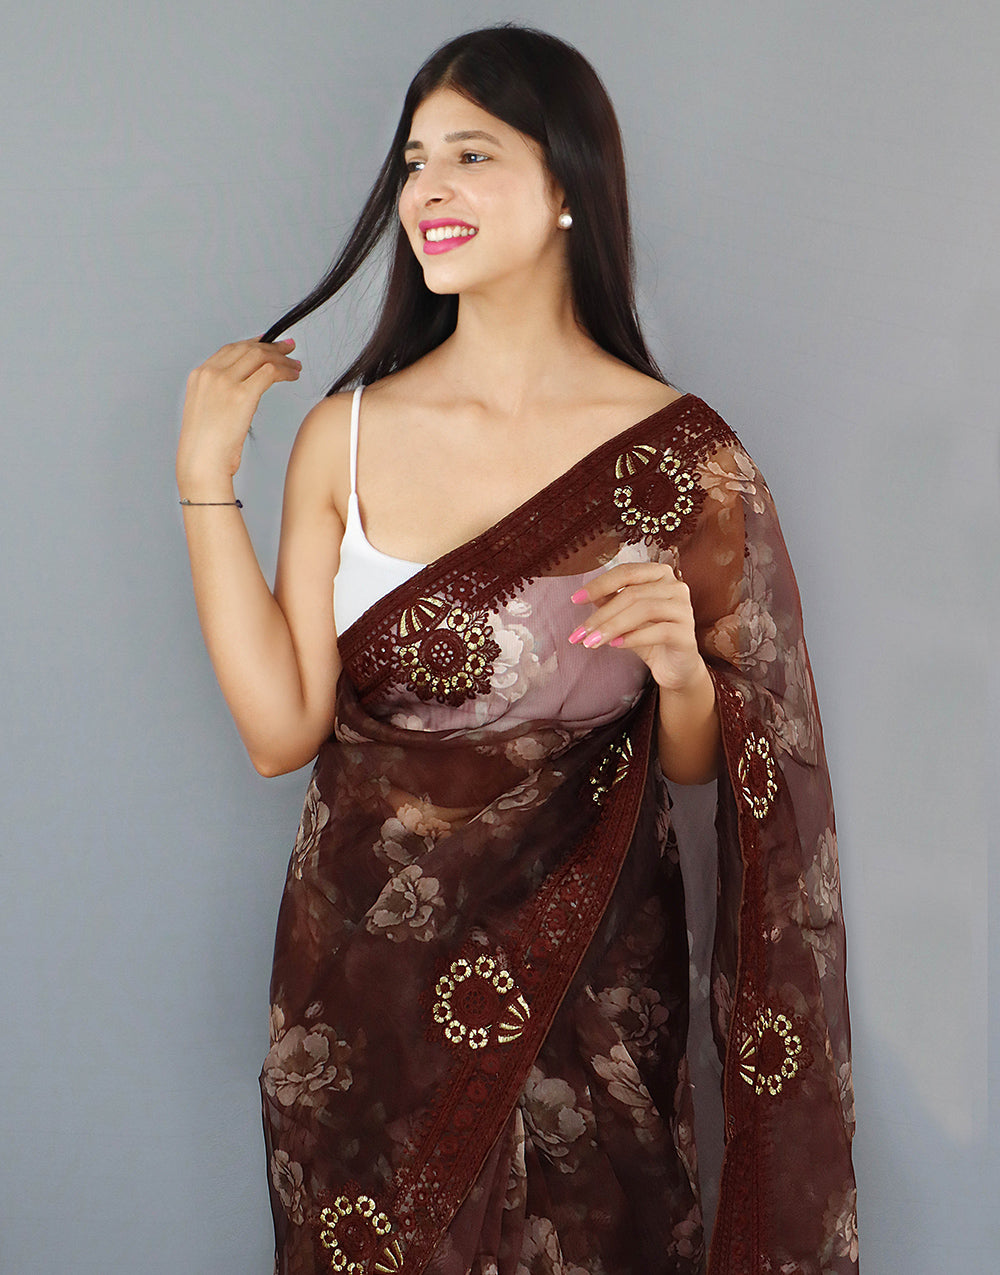 Chocolate Brown Organza Saree With Printed & Embroidery Work Border